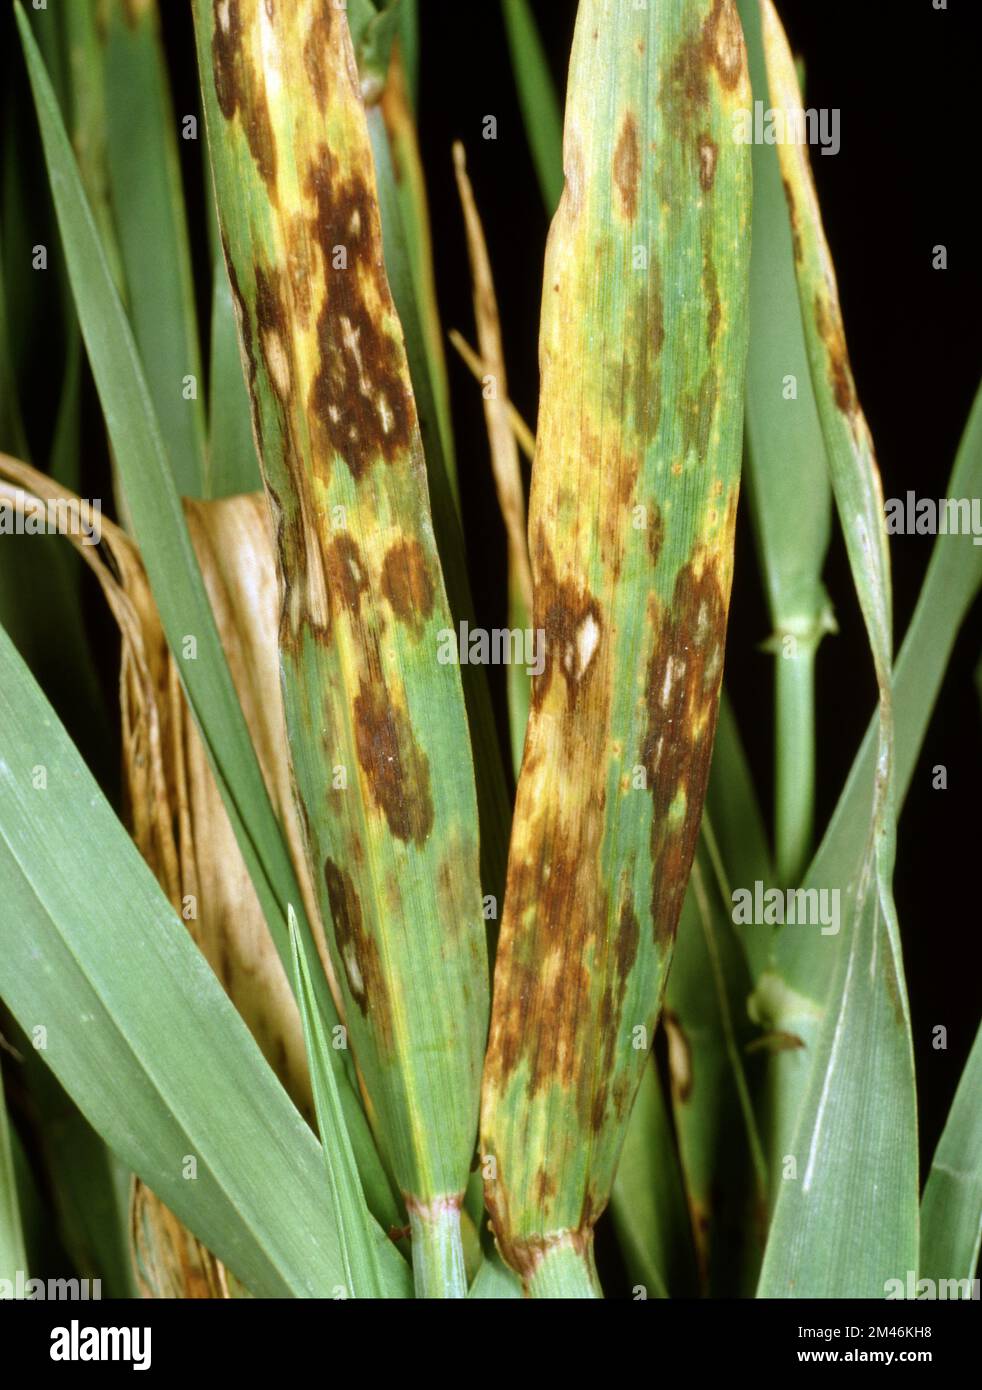 Scald or leaf blotch ( Rhynchosporium secalis ) necrotic lesions some with grey centres on leaves of a maturing barley (Hordeum vulgare) crop plant Stock Photo